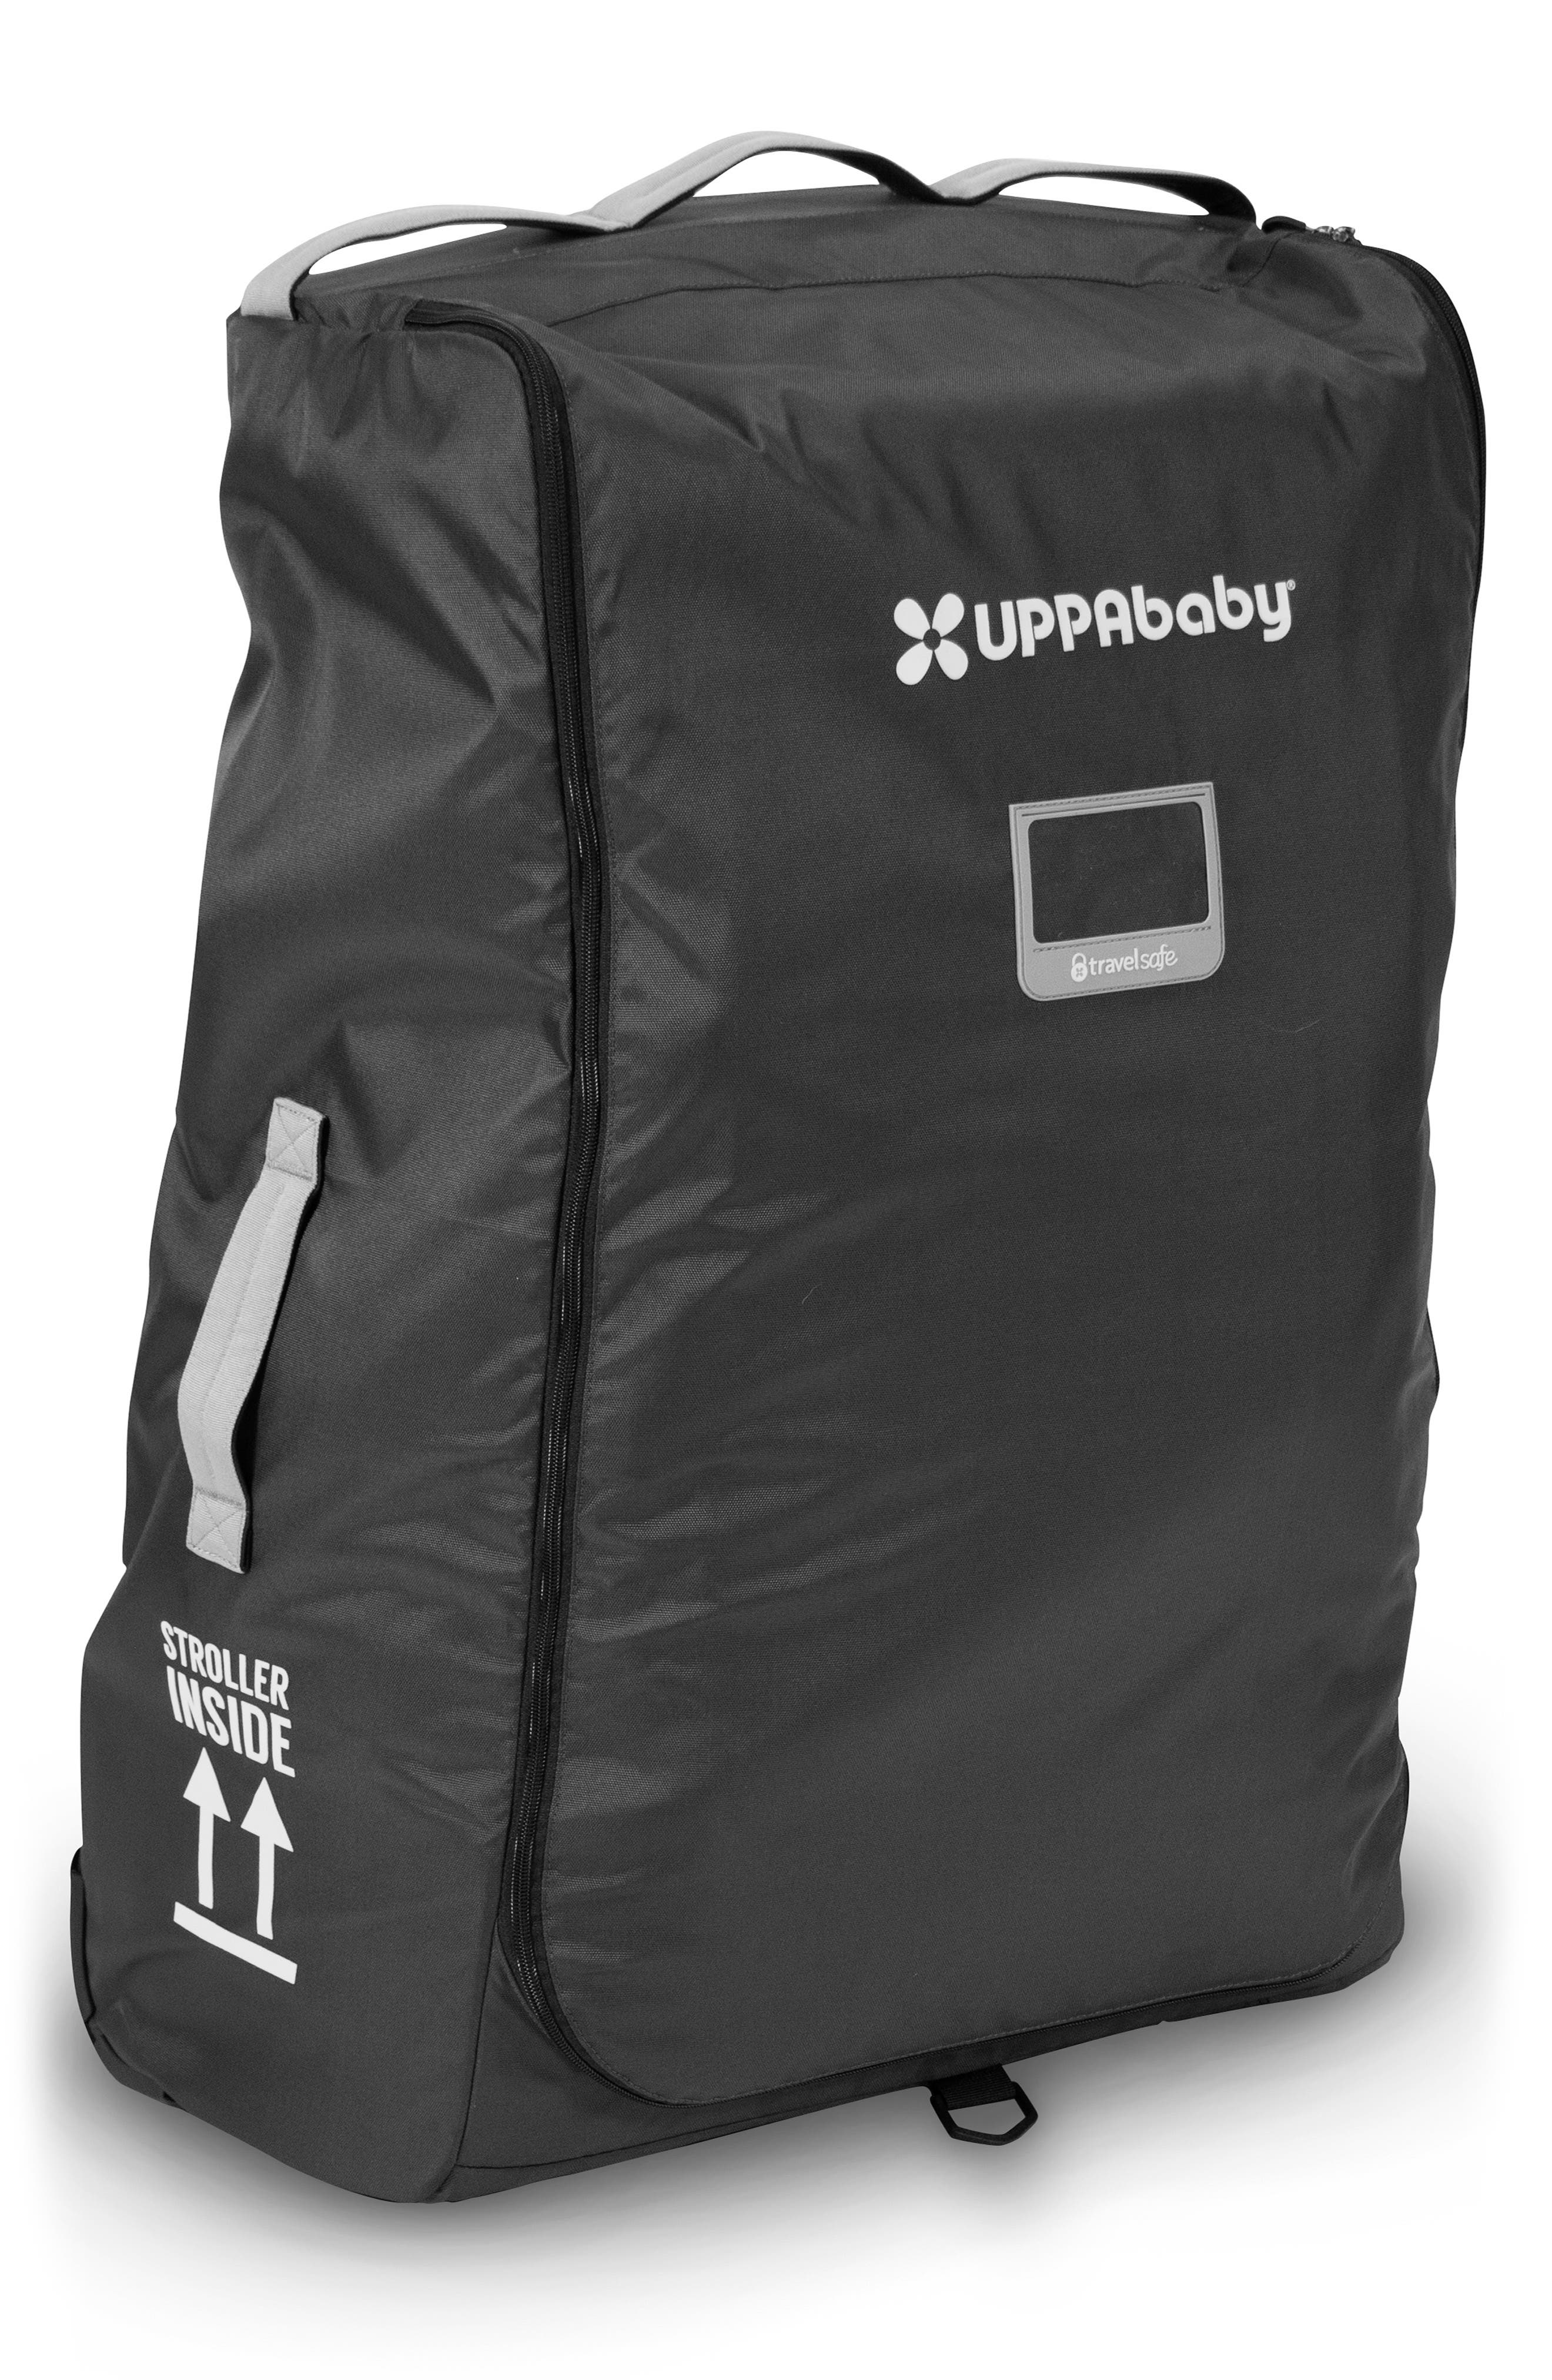 uppababy backpack